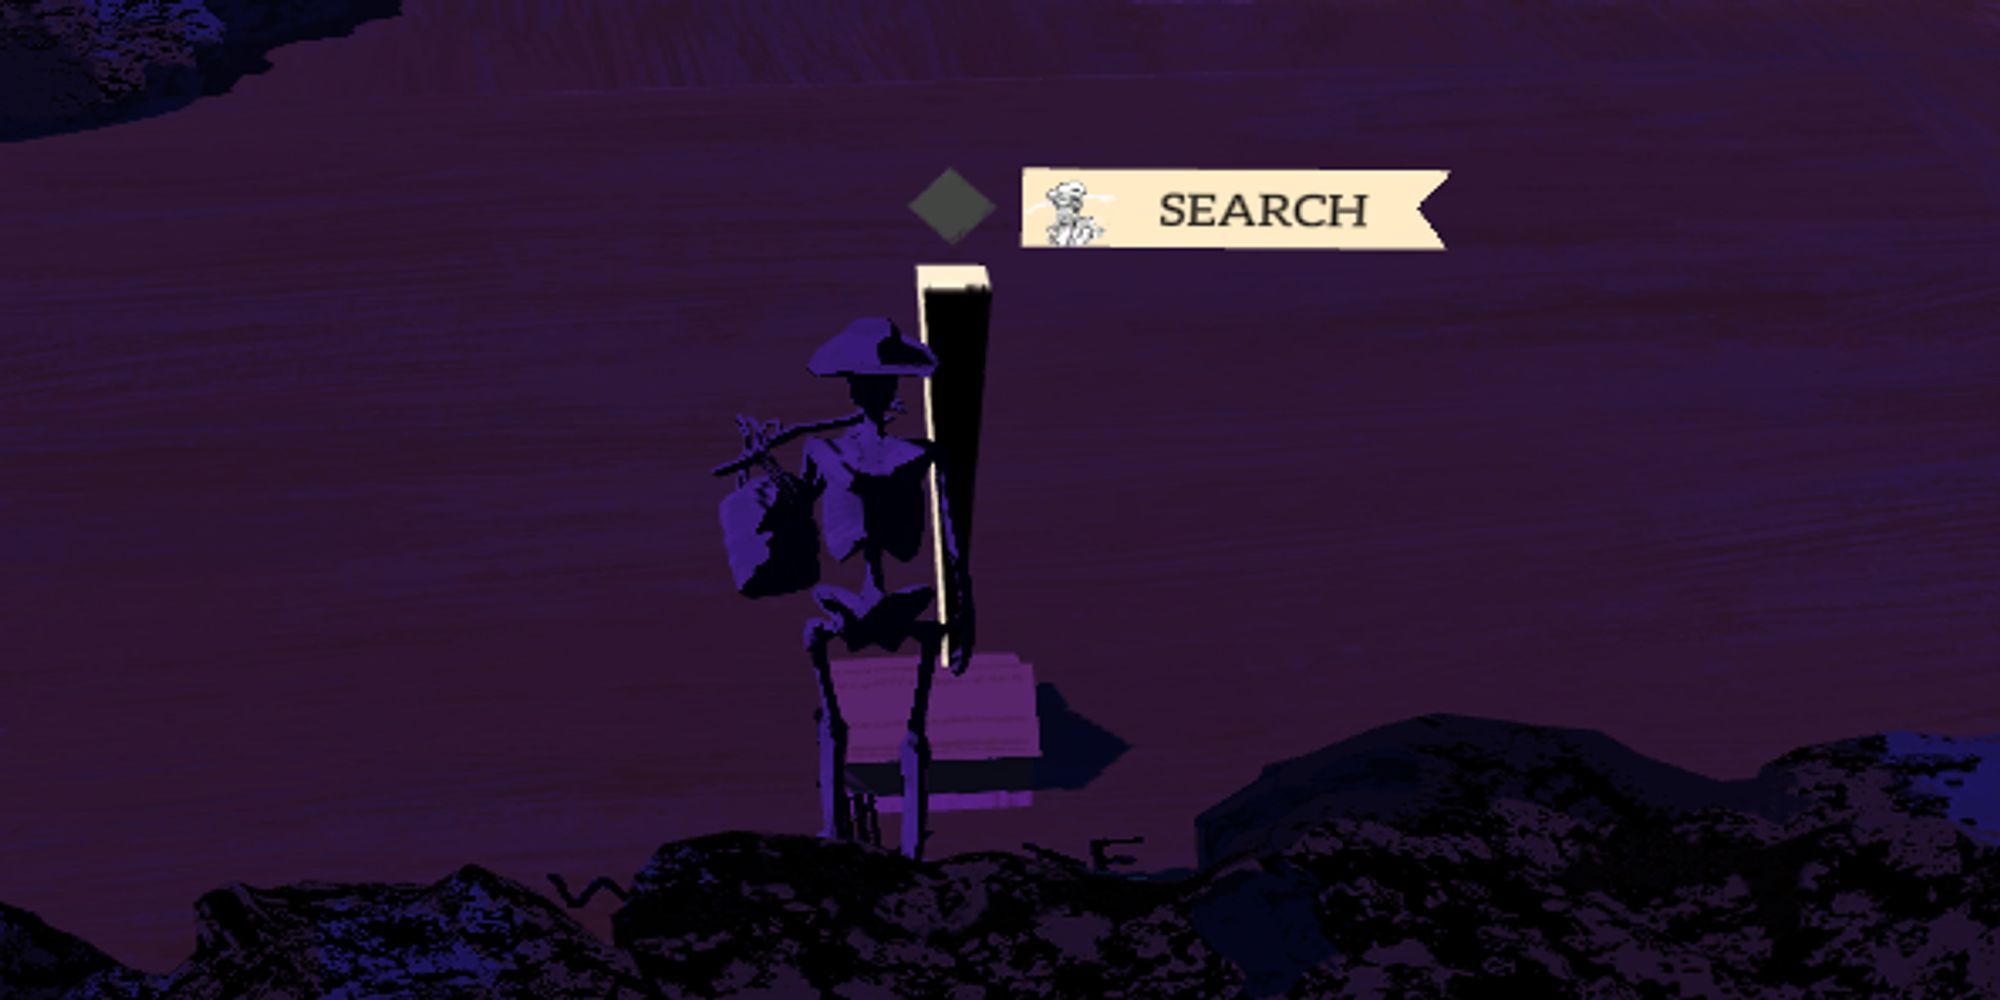 Purple background, house with the option to search, skeleton standing in front